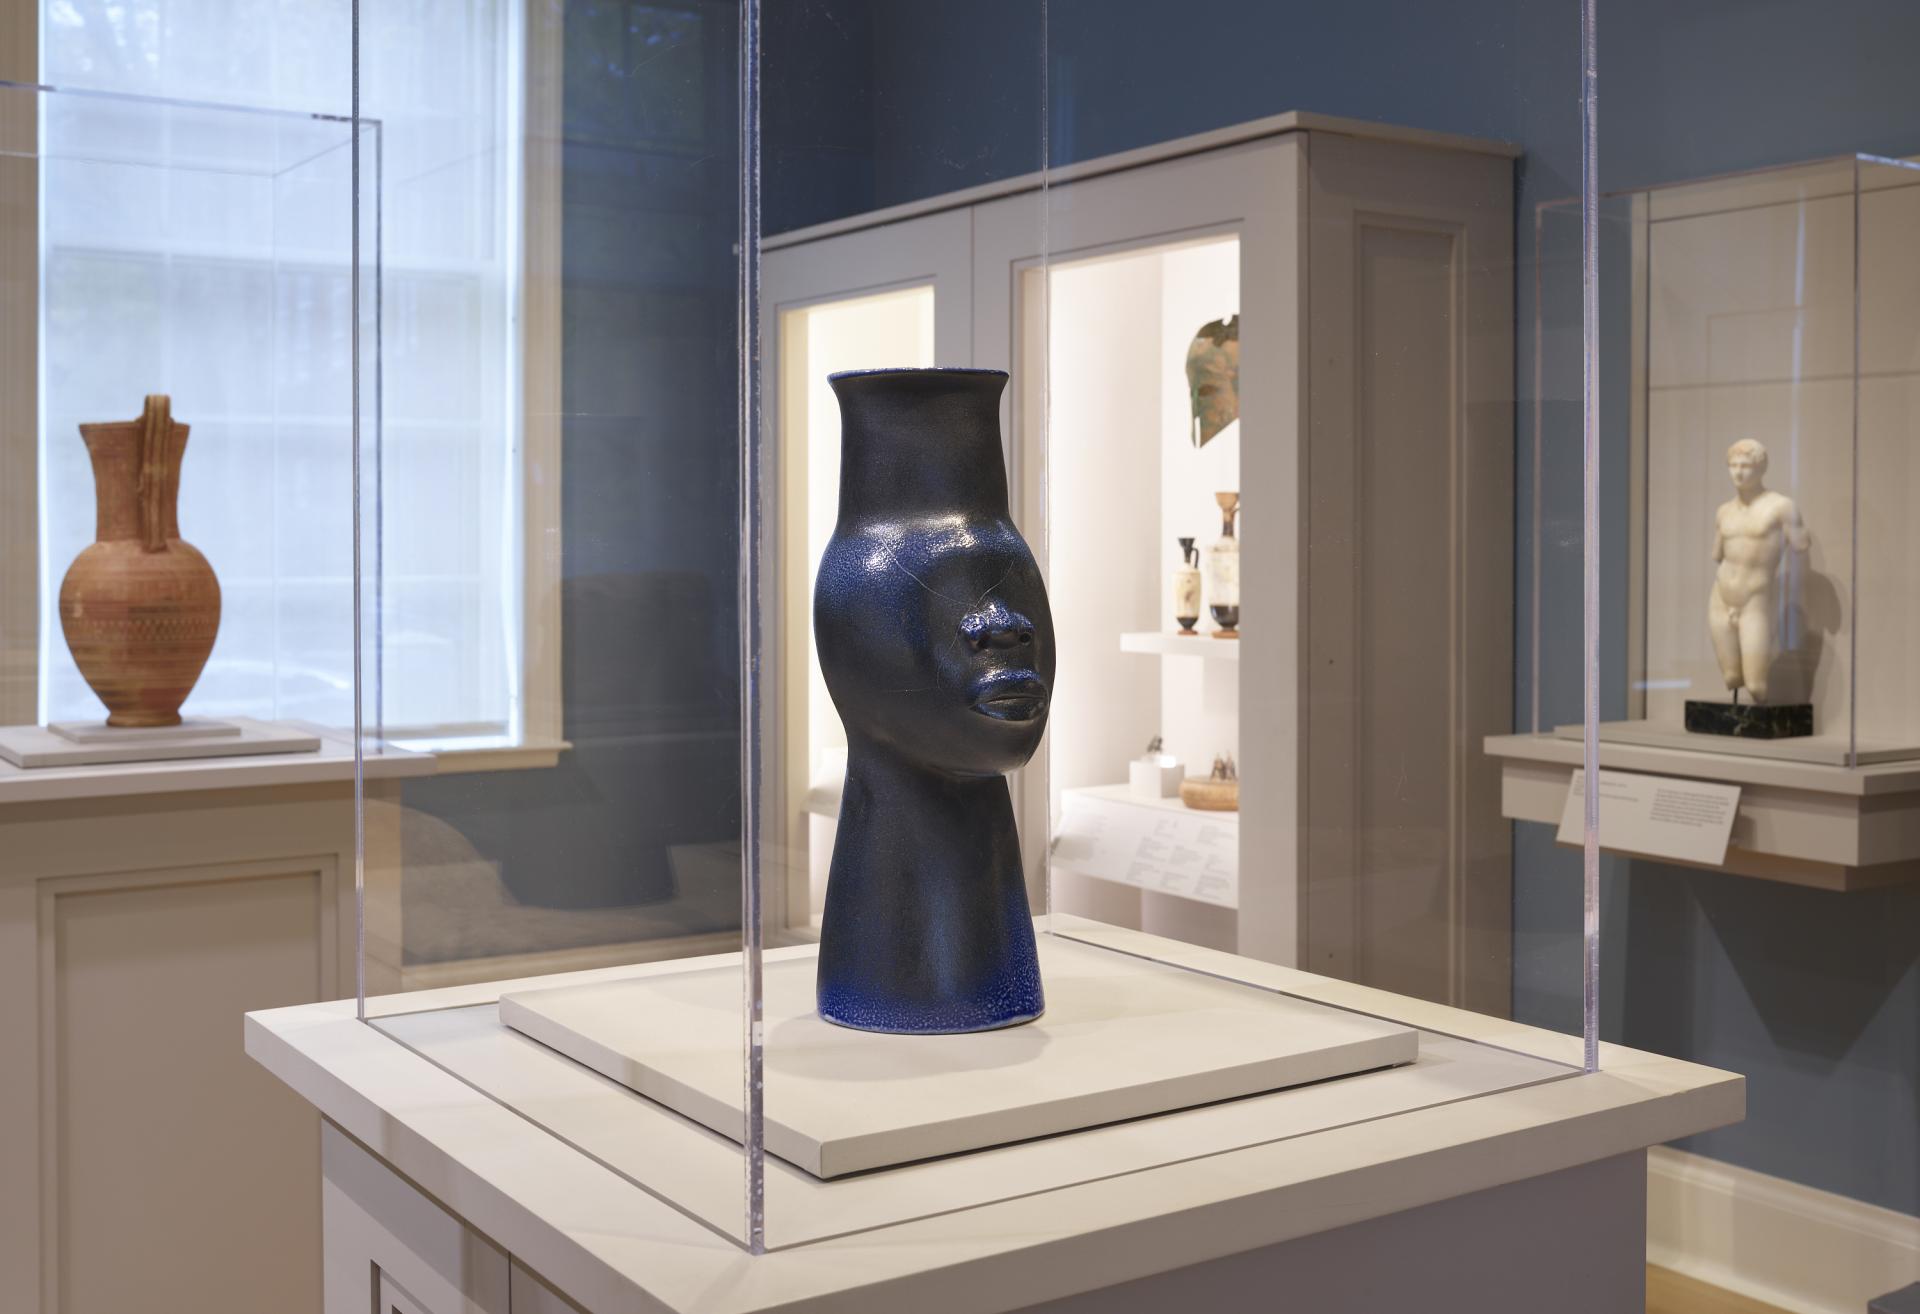 Installation shot of Simone Leigh "108 (Face Jug Series)" sculpture on view in the Greek and Roman gallery